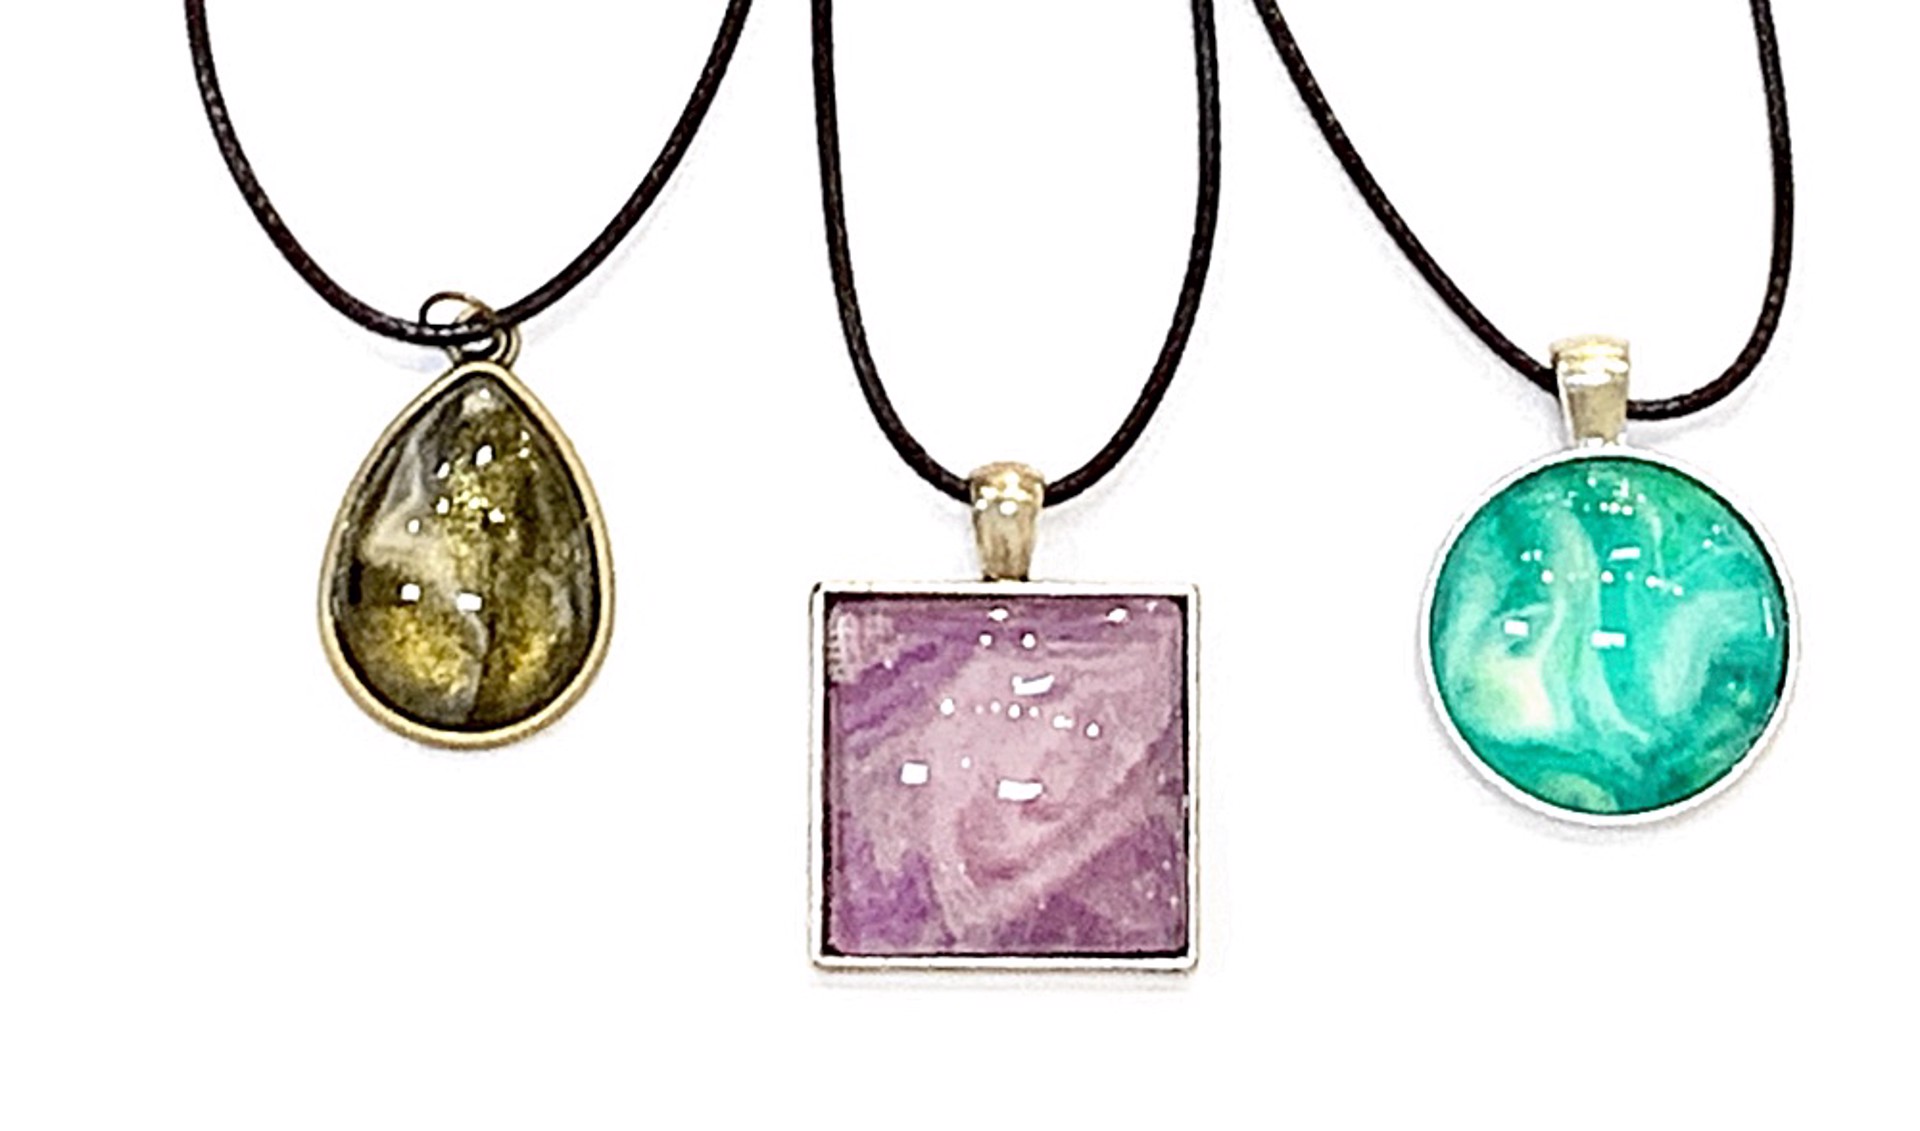 Necklace - Assorted Fluid Art by Victoria Thornton